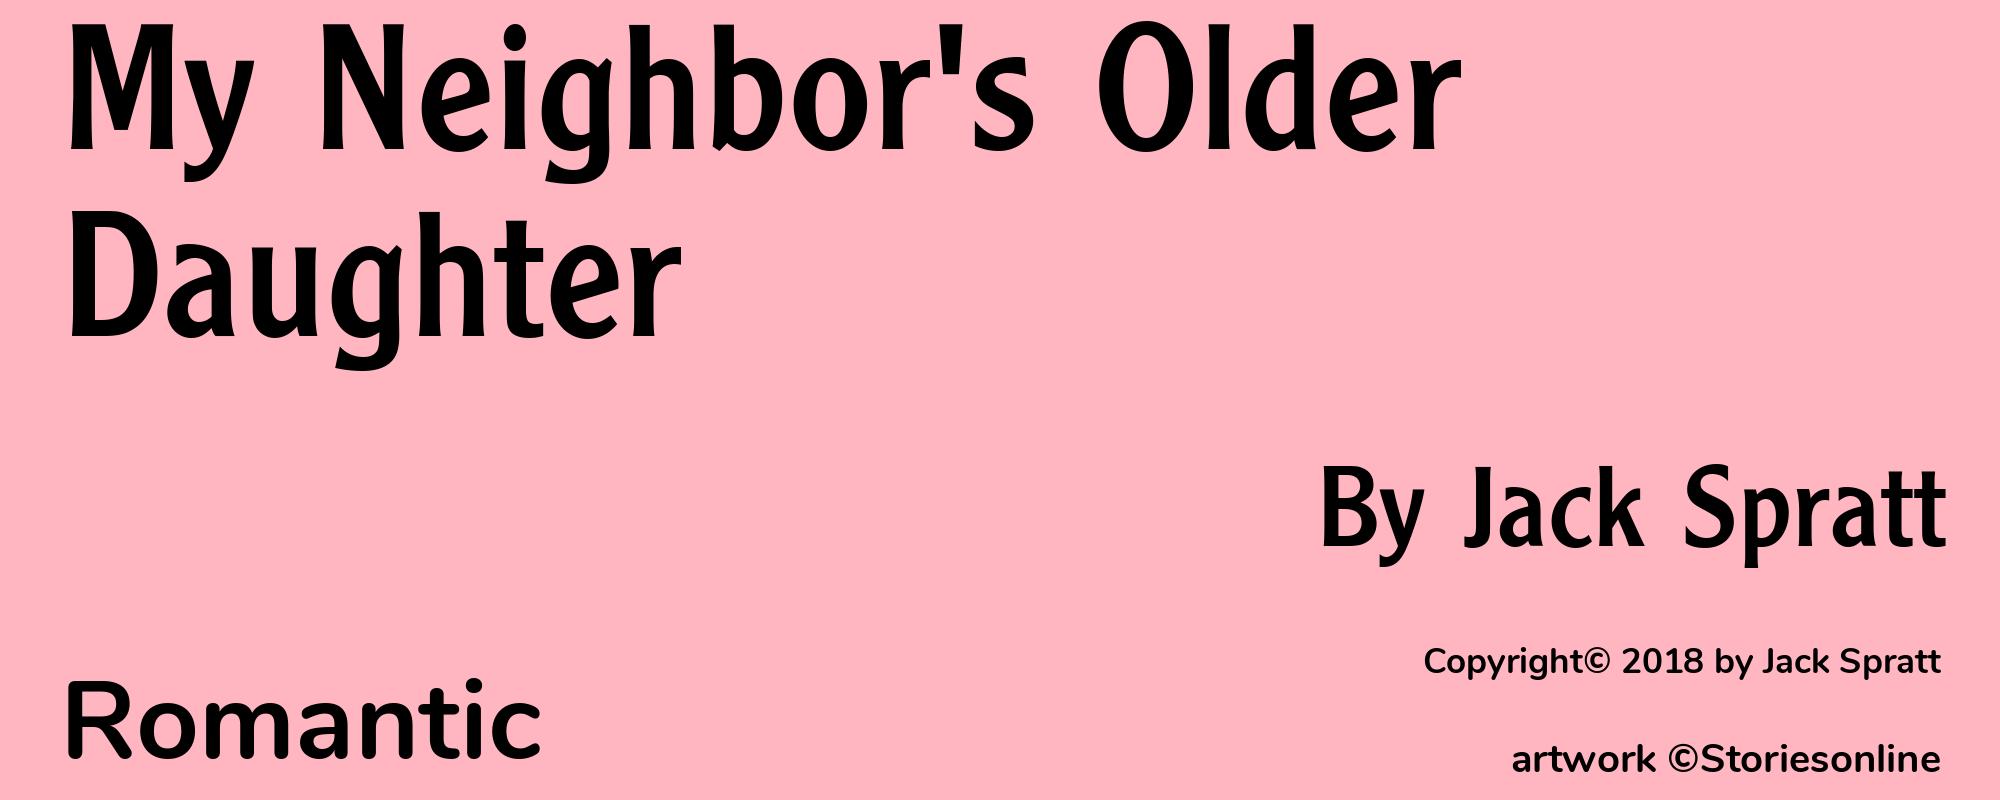 My Neighbor's Older Daughter - Cover